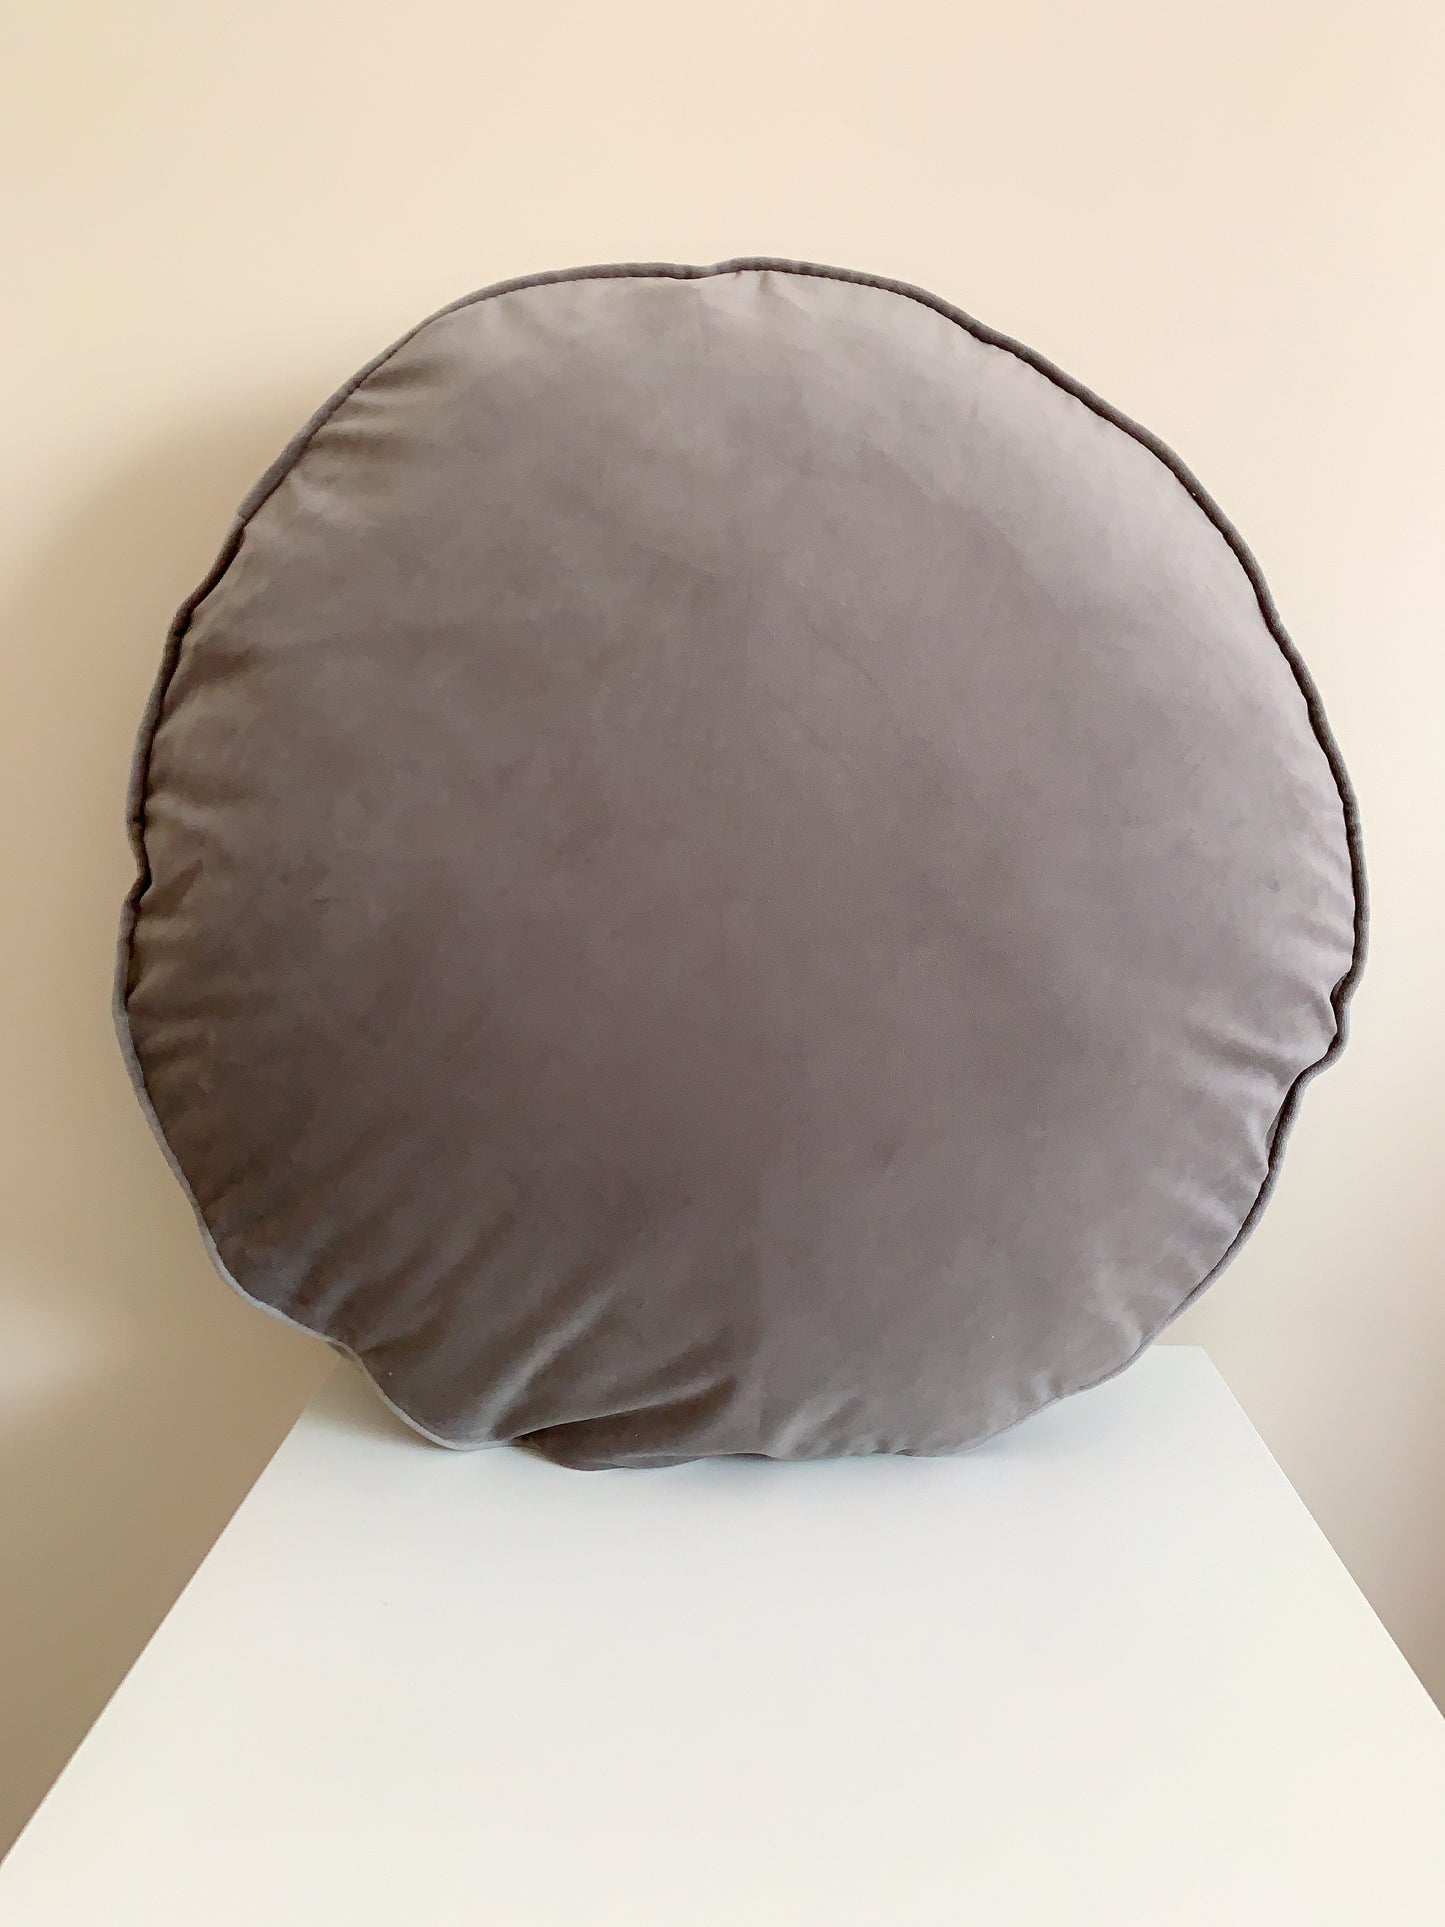 Silver Grey Luxury Velvet Cushion Cover, 20” Round Pillow Cover, Decorative Throw Pillow Scatter Cushion